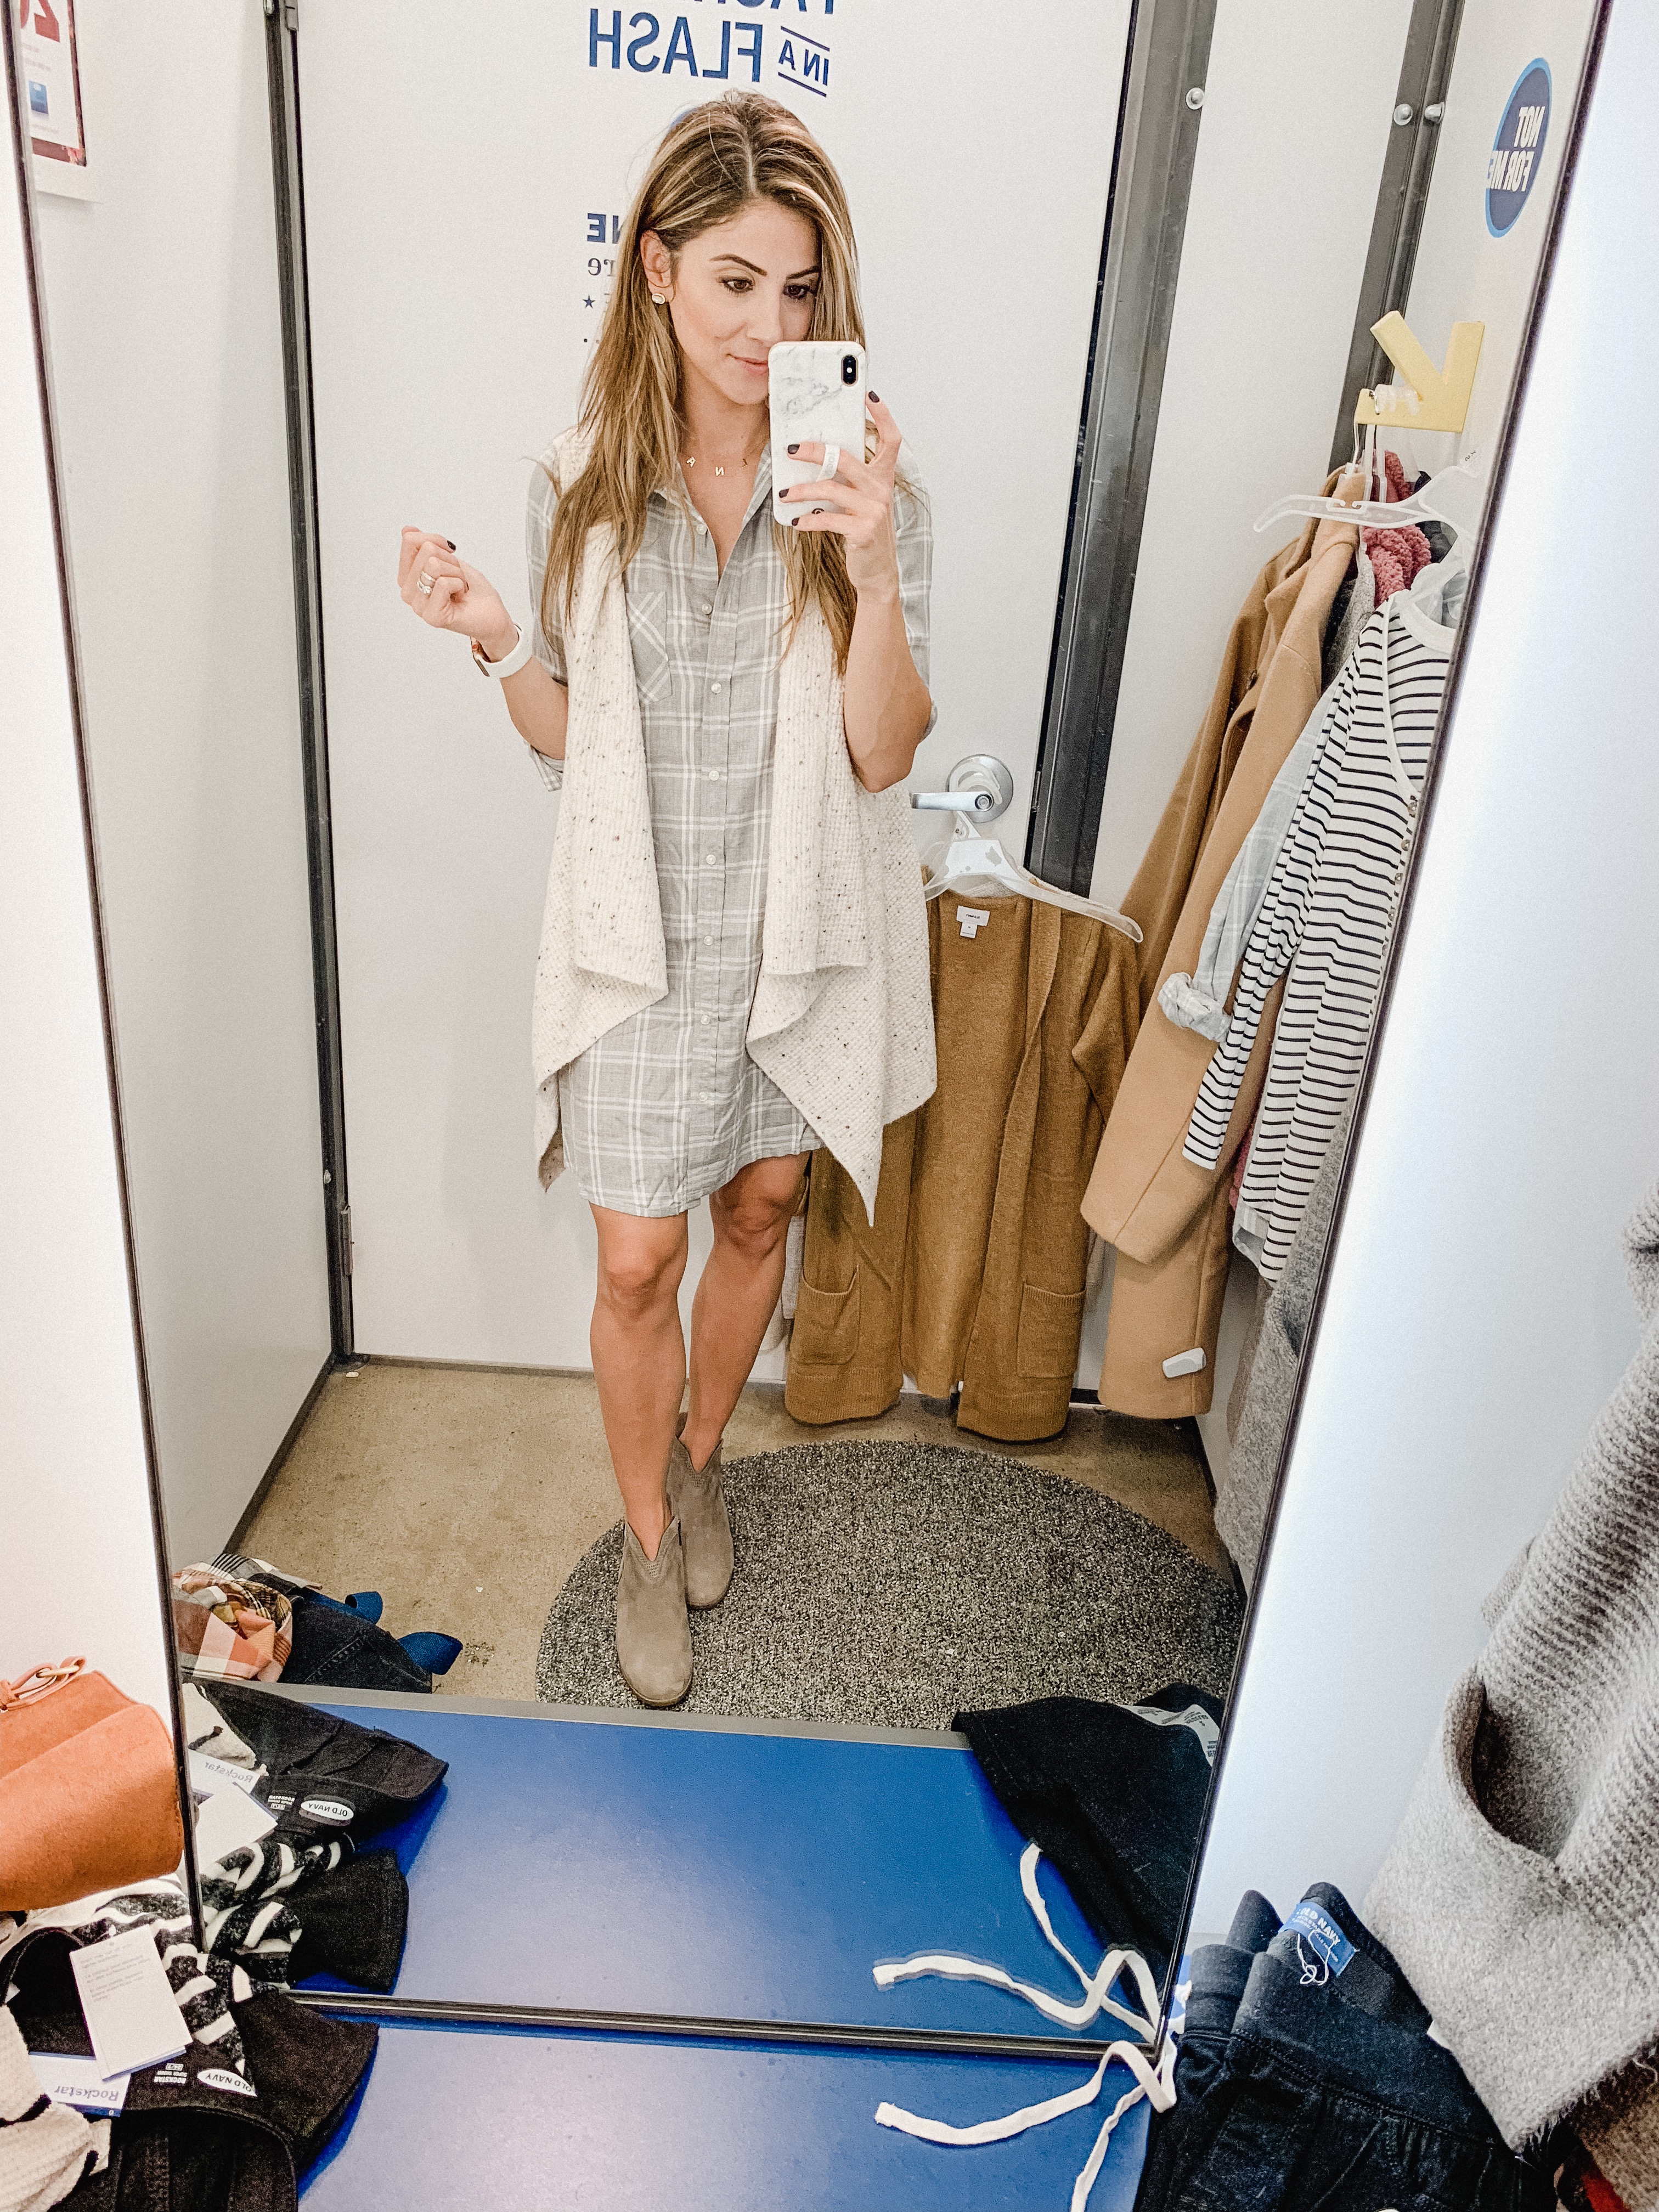 Connecticut life and style blogger Lauren McBride shares a fall Old Navy try-on session featuring a capsule wardrobe for October.